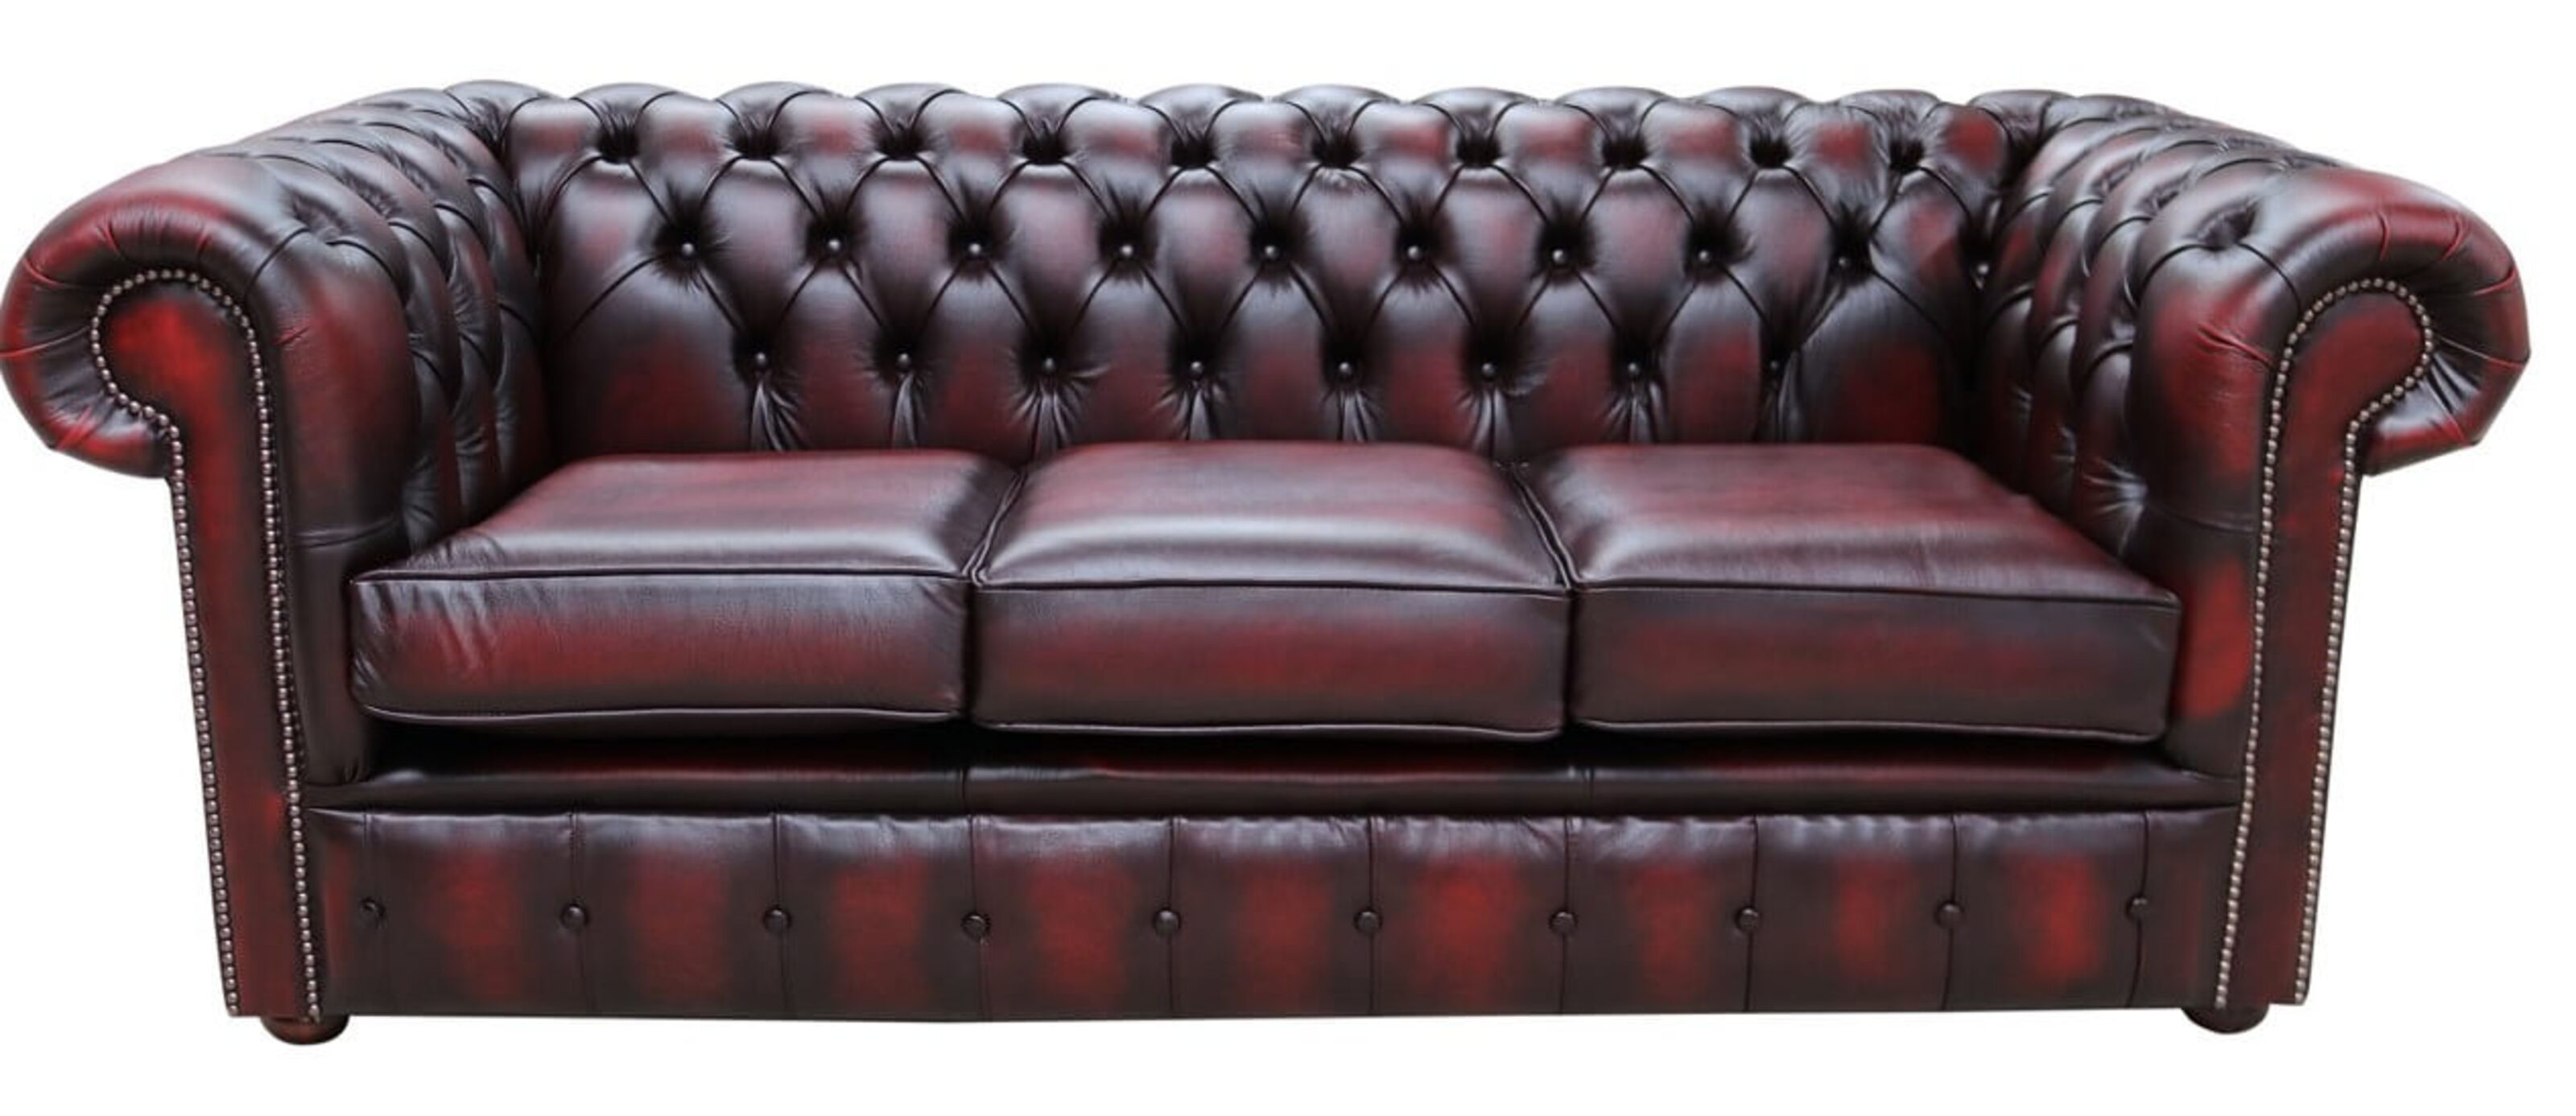 Rub Off Antique Oxblood Leather, Traditional Leather Sofas Uk